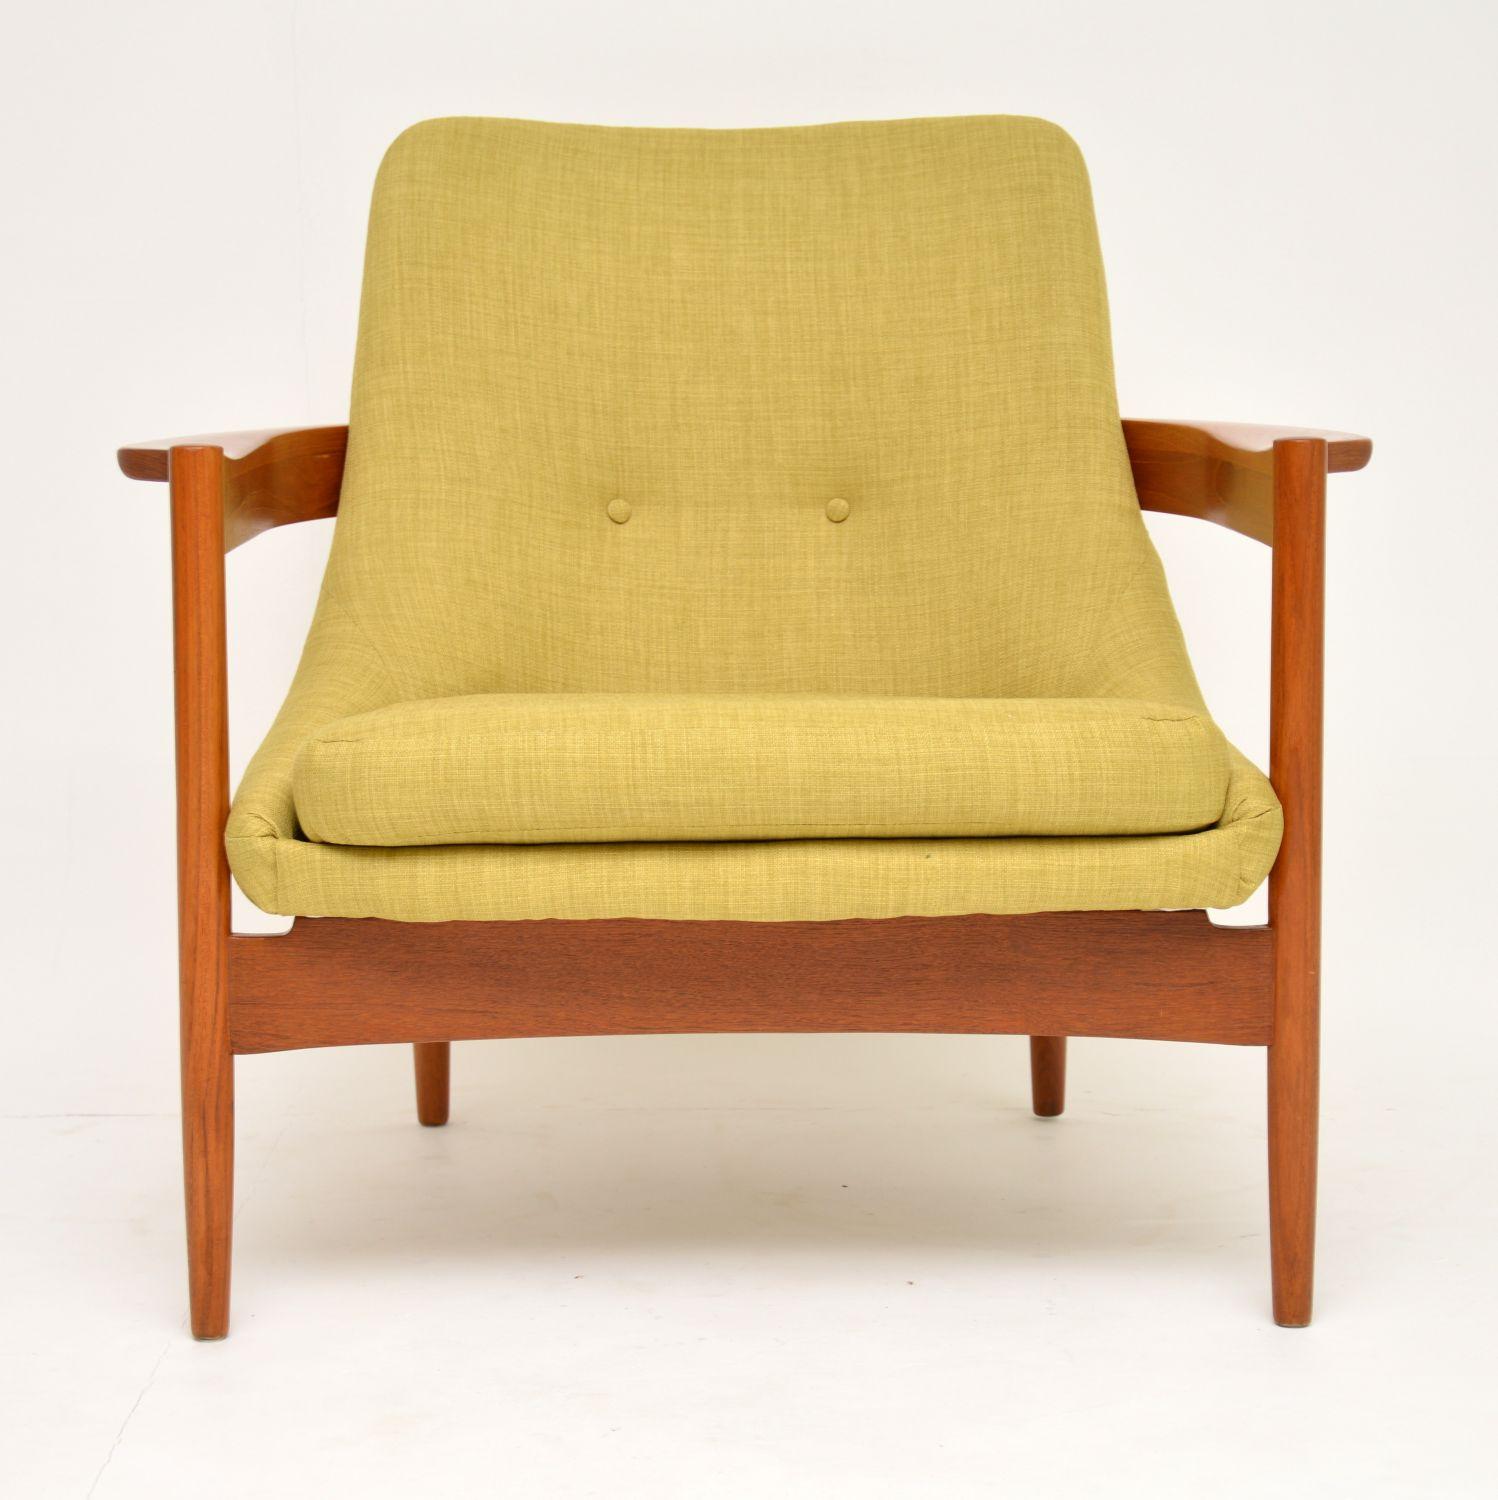 A stylish, rare and extremely comfortable vintage armchair, this is the Delta armchair, designed by Guy Rogers and dating from the 1960s. This is rarely seen, and is a superb design, it’s compact but with generous seating space, and is really so